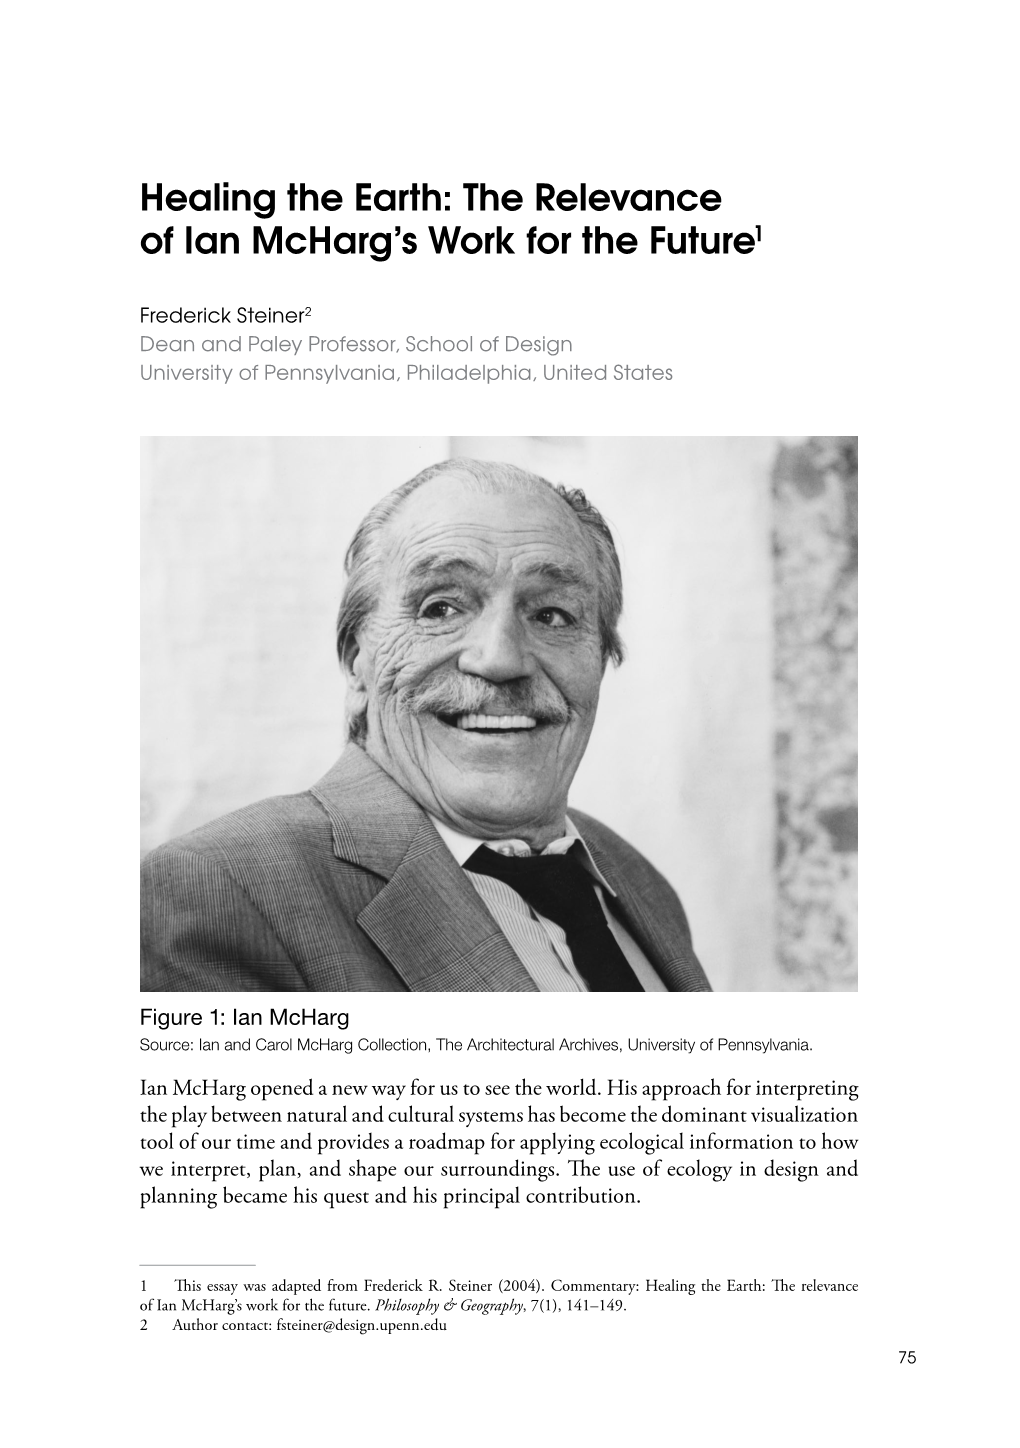 The Relevance of Ian Mcharg's Work for the Future